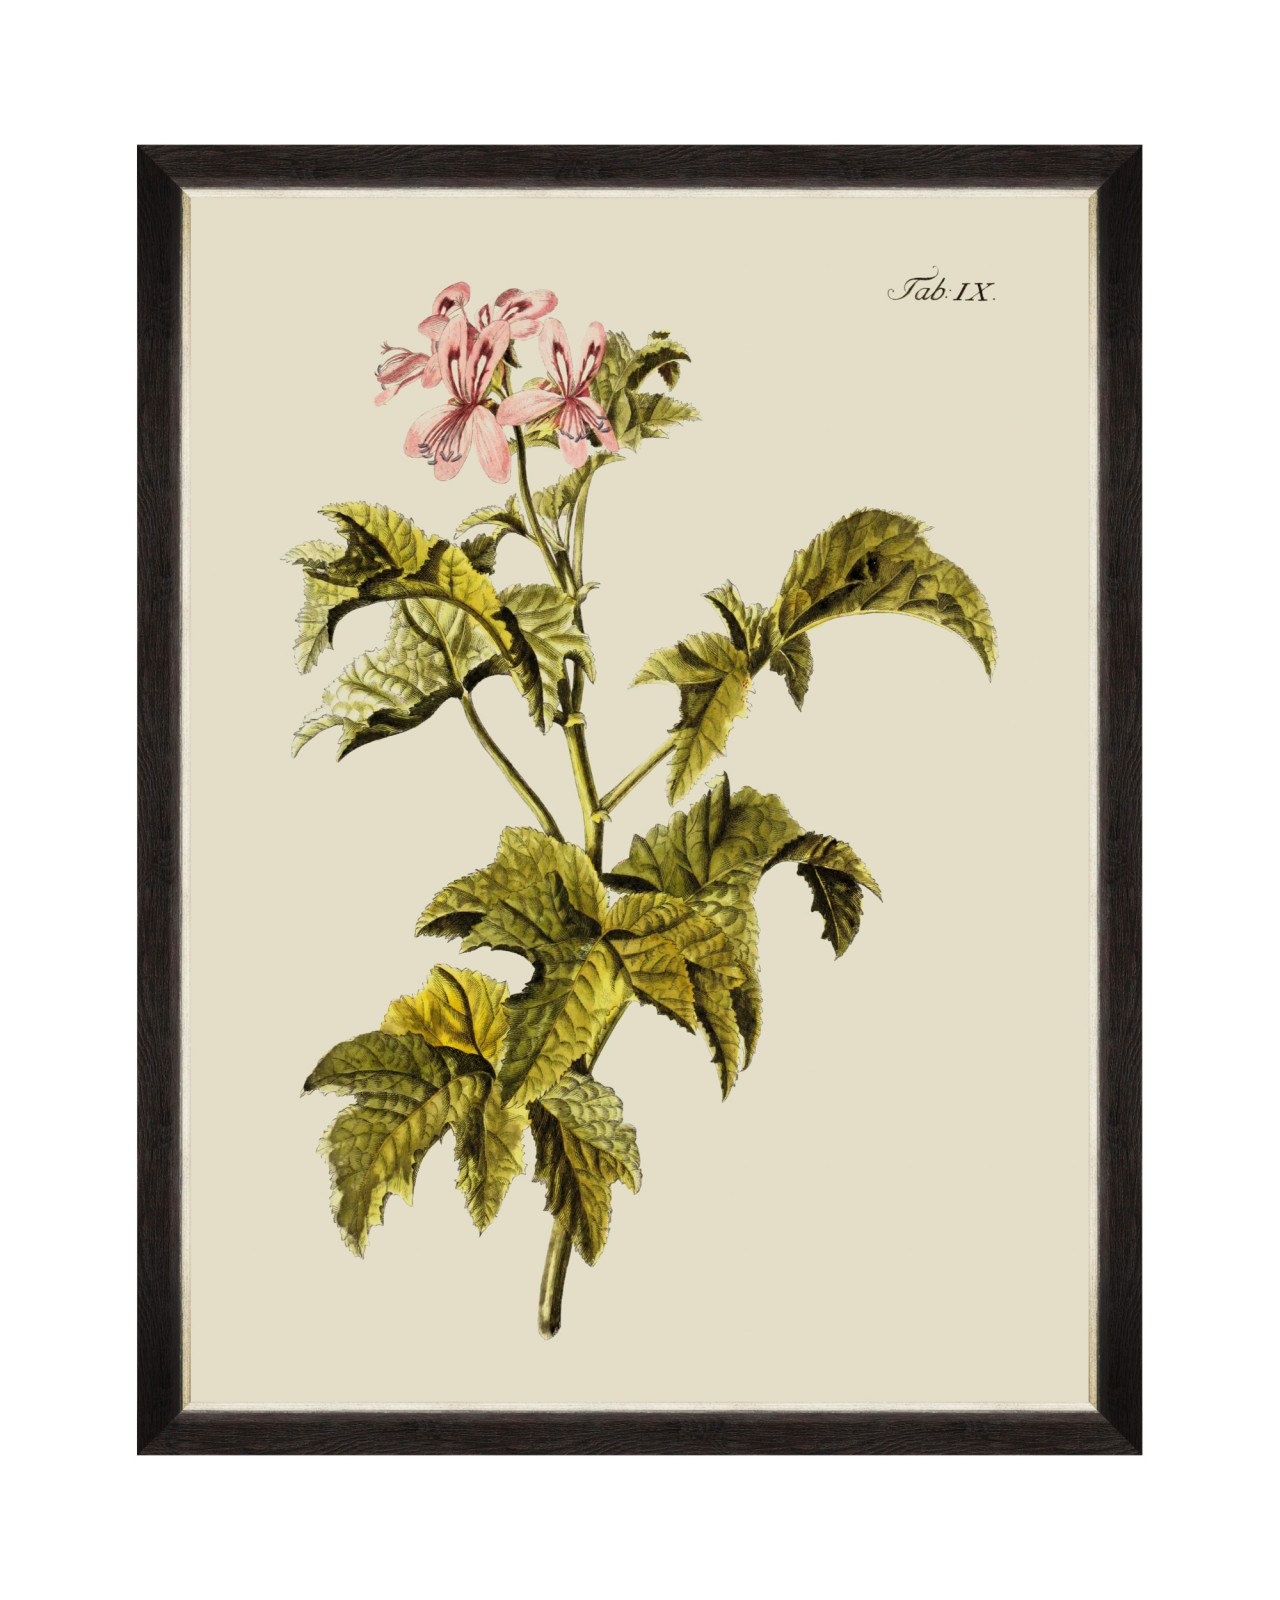 images/productimages/small/botanical-iii-framed-art-60x80cm-fa13226.jpg